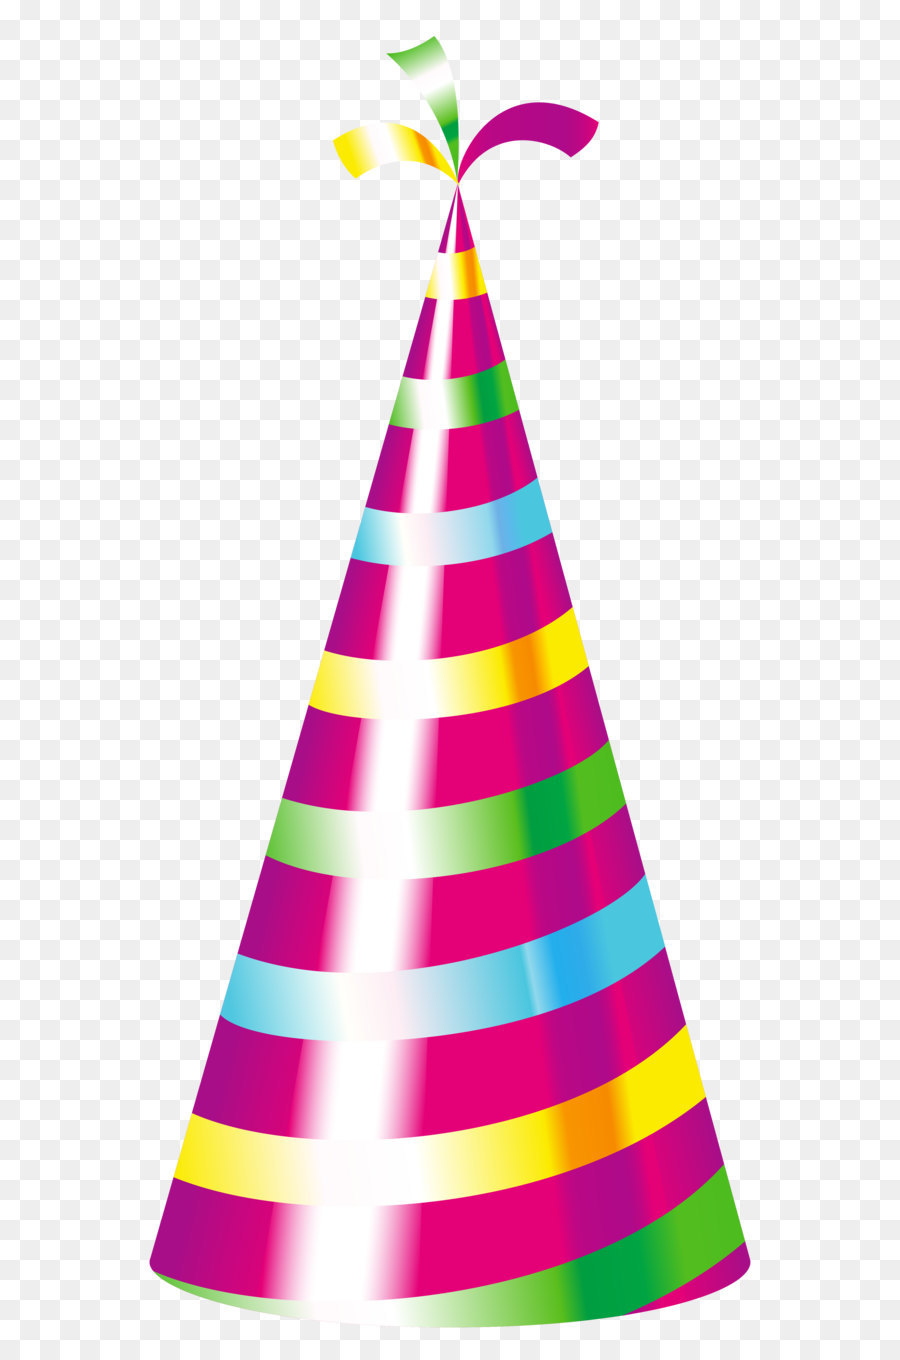 Birthday Party hat Clip art - Party Hat PNG Clipart Image png download - 3015*6279 - Free Transparent Birthday Cake png Download.